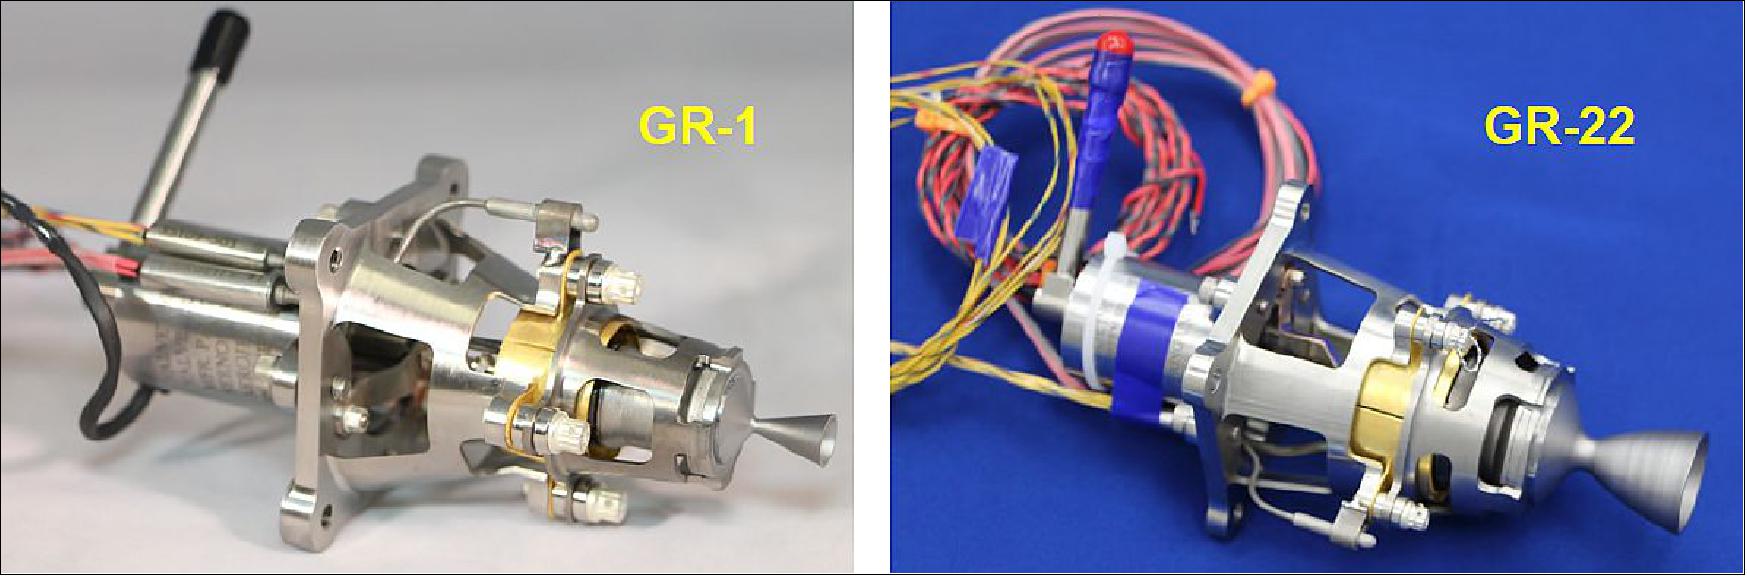 Figure 7: Photo of the prototype Aerojet GR-1(left) and of the GR-22 thrusters (right), image credit: Aerojet Rocketdyne